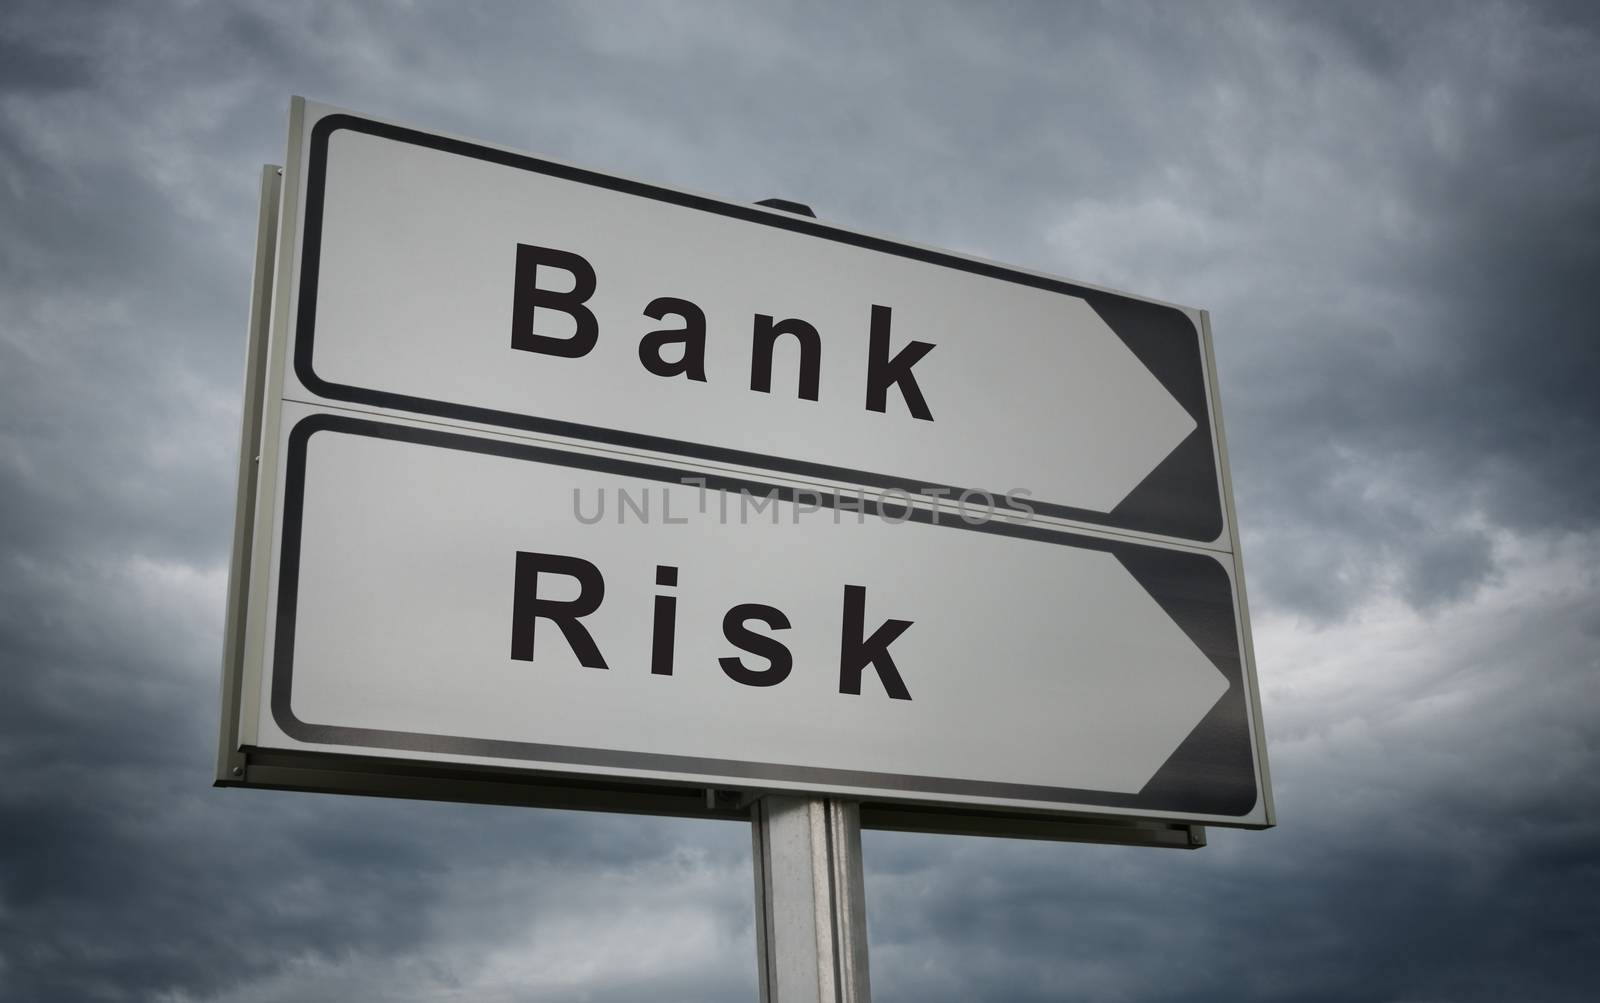 Bank Risk road sign. Concept of financial relations with banks.